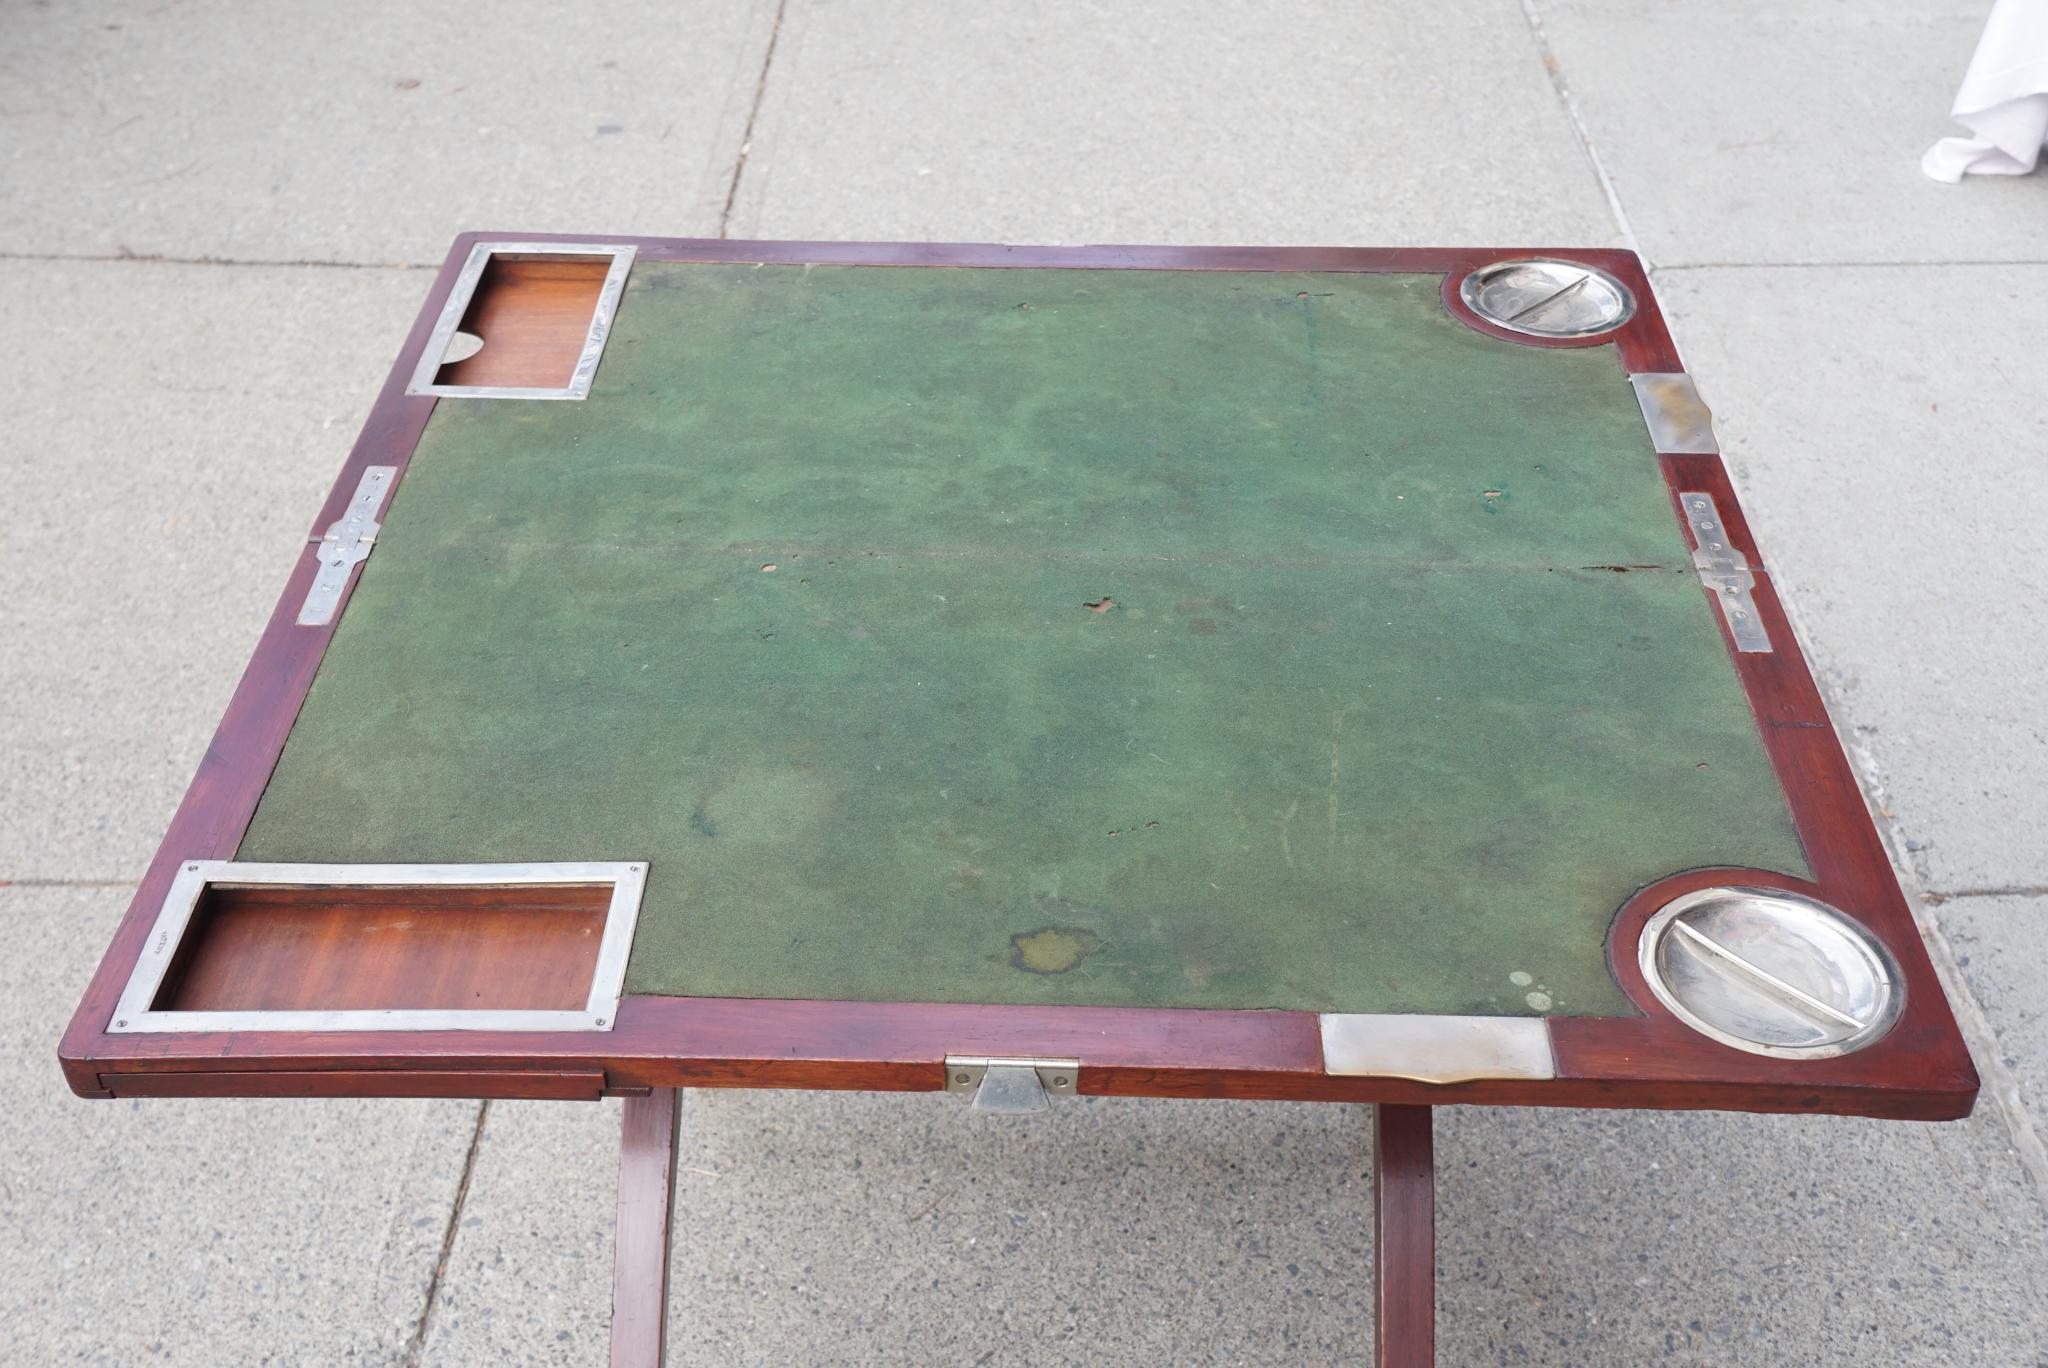 This fine and unusual games table is of rare form, circa 1900 and 1910, is made of mahogany and deal secondaries. The brass fittings have all been chrome-plated, a feature usually reserved for boating fixtures. The table locks closed and once opened